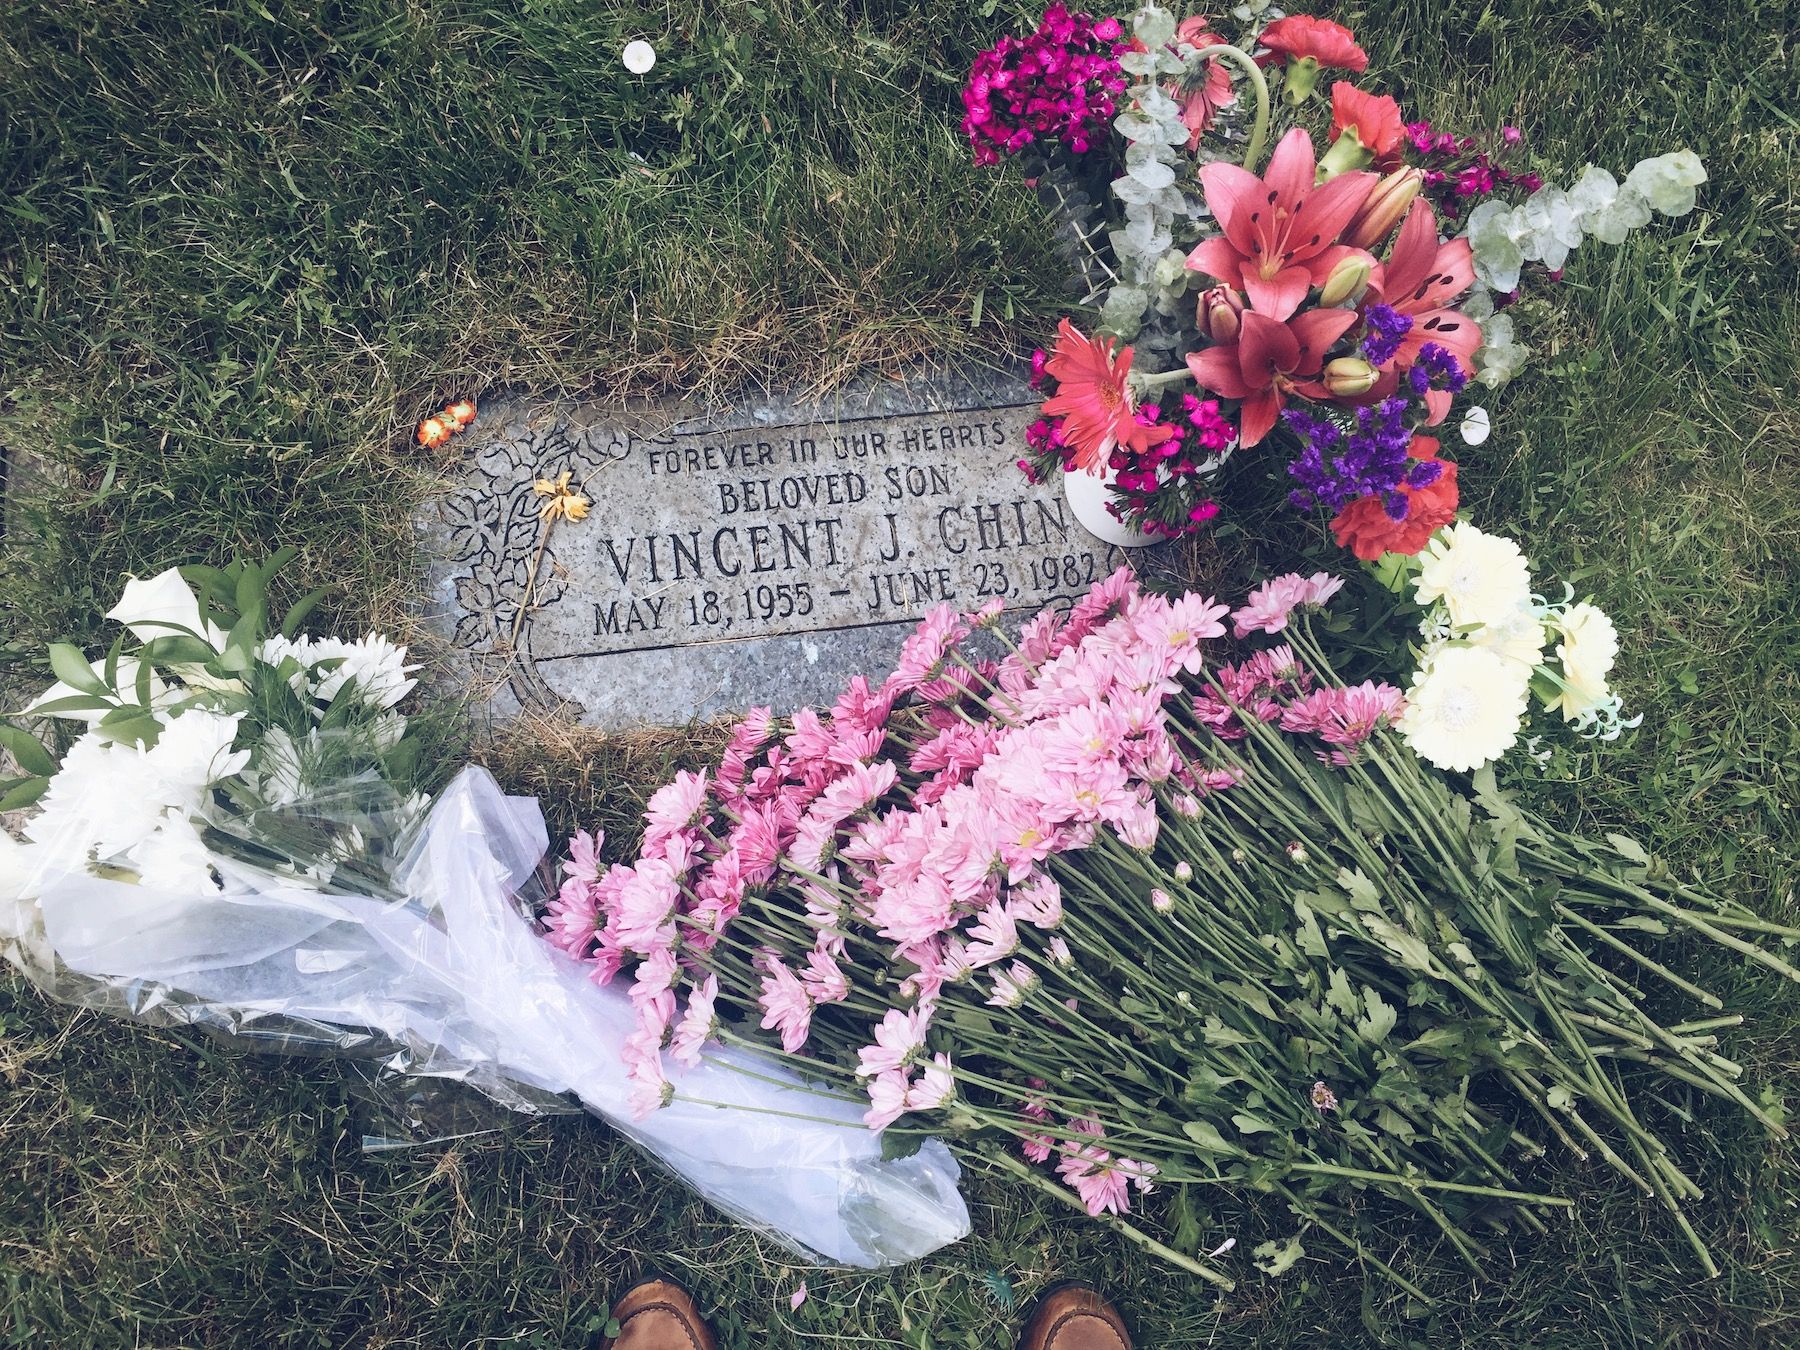 Vincent Chin's headstone. Pile of flowers